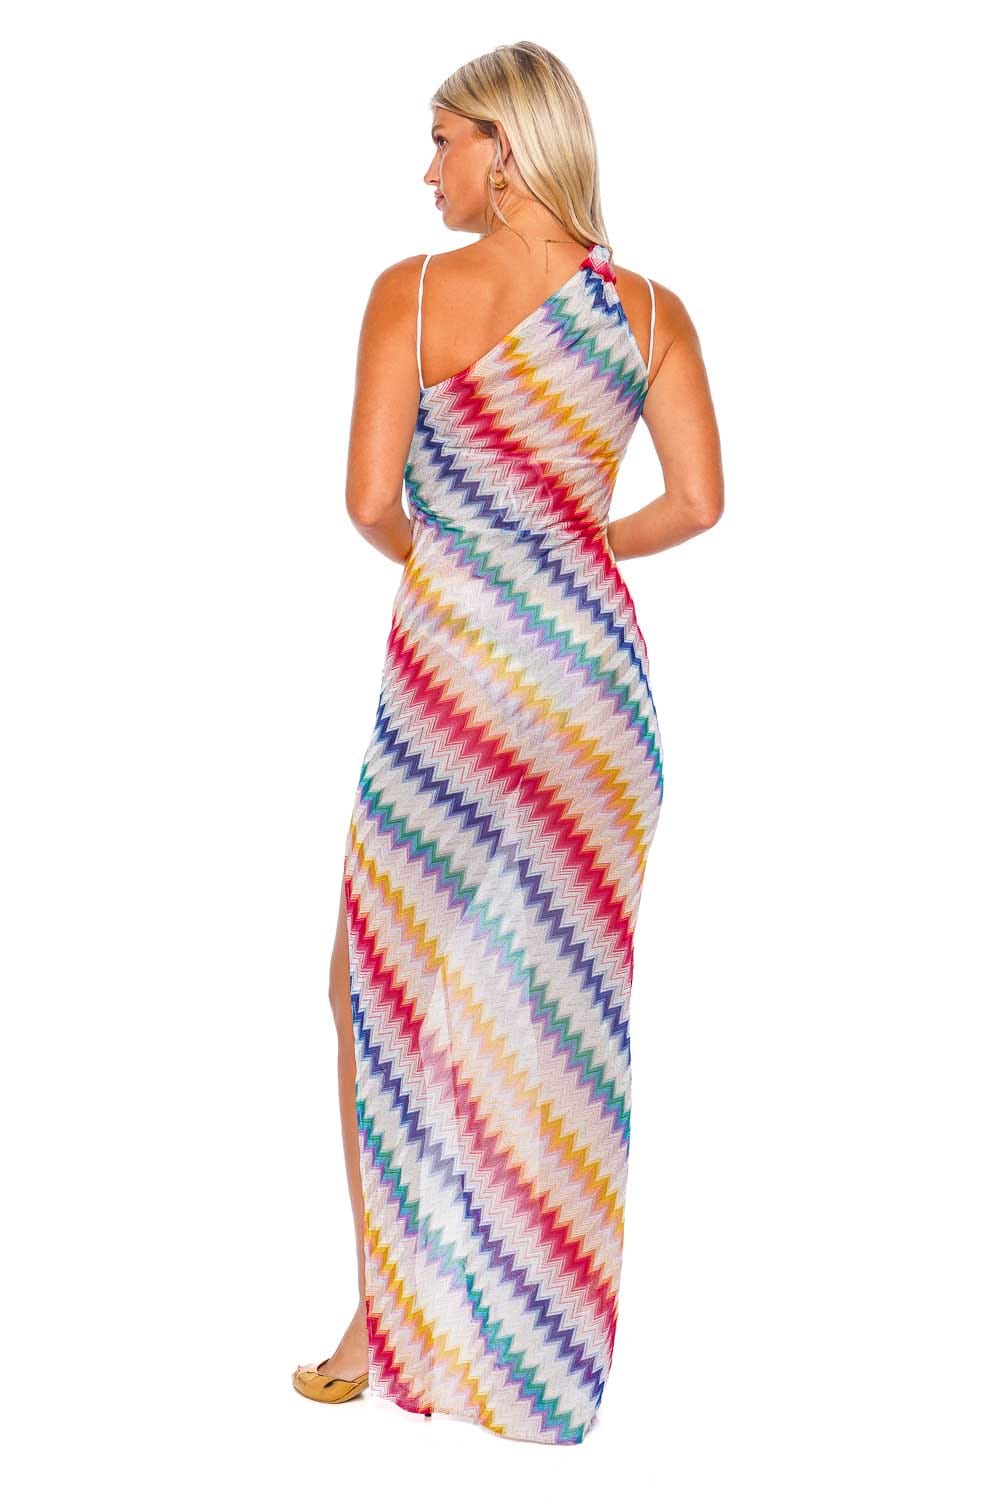 Missoni Mare Zig Zag One Shoulder Beach Cover Up